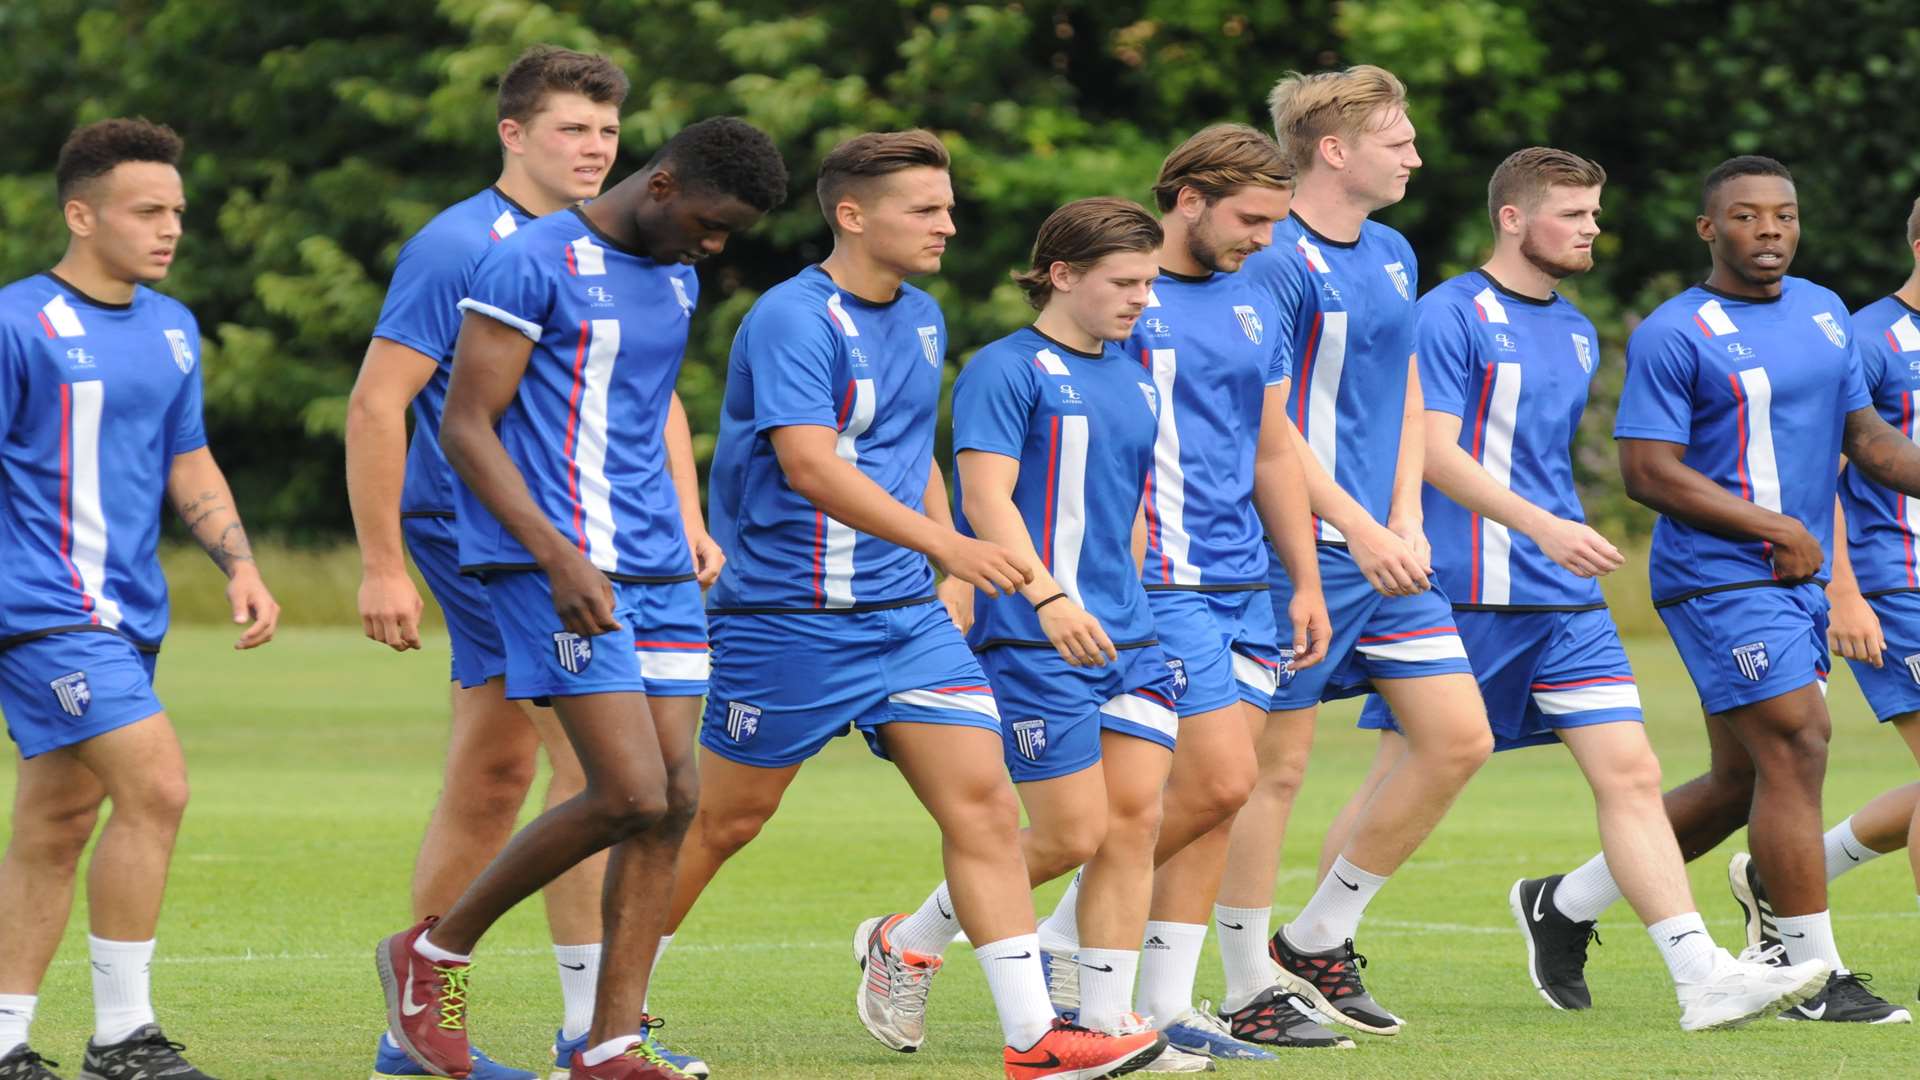 Gills players feel the heat Picture: Steve Crispe